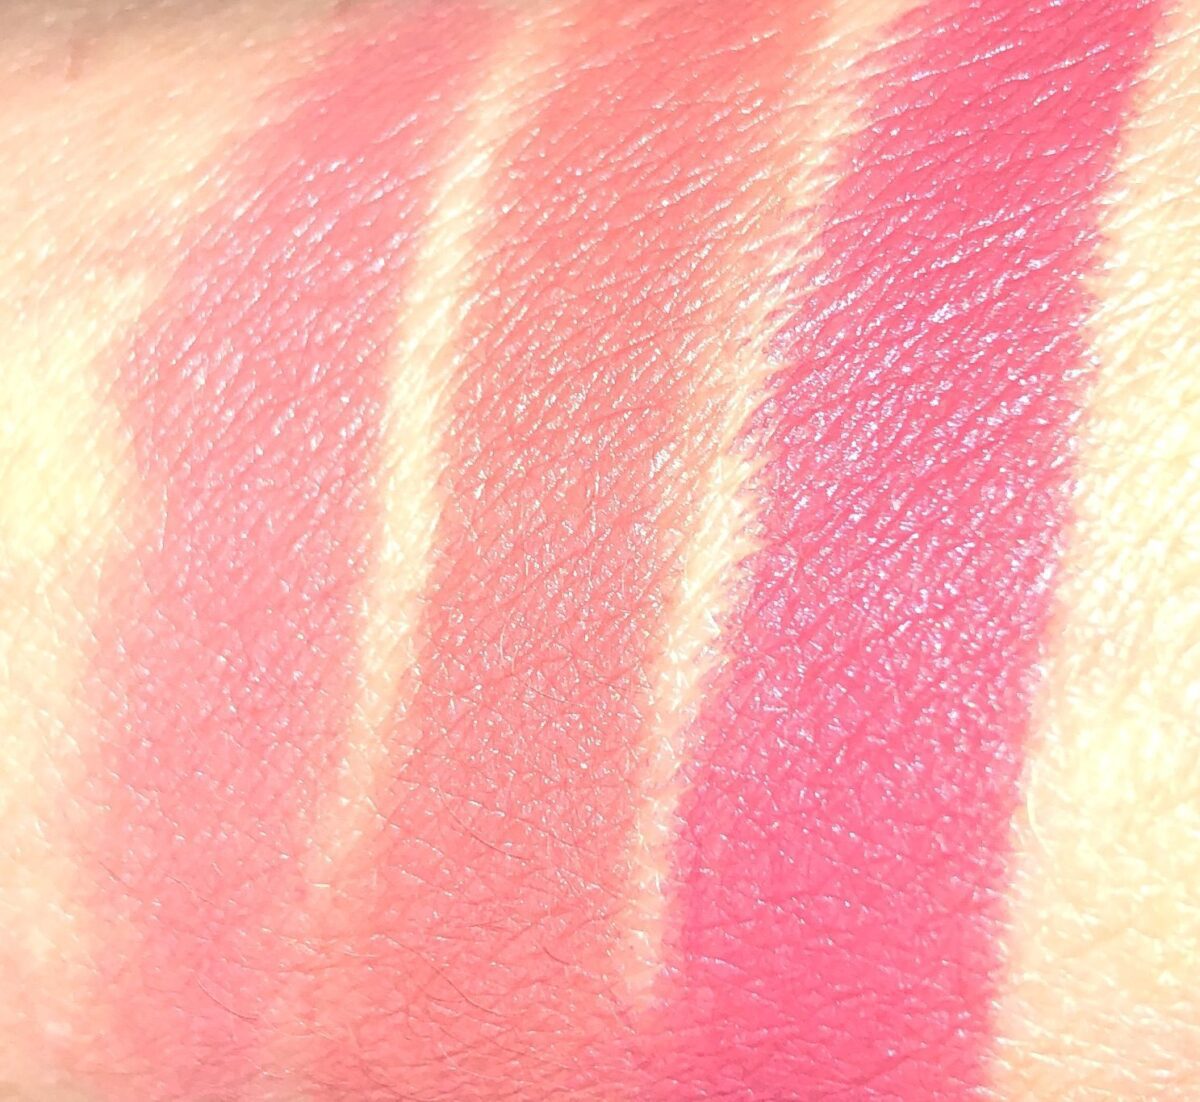 LOVE FILTER BRIDAL LIPSTICK SWATCHES: L TO R: WEDDING BELLS, MRS. KISSES, FIRST DANCE